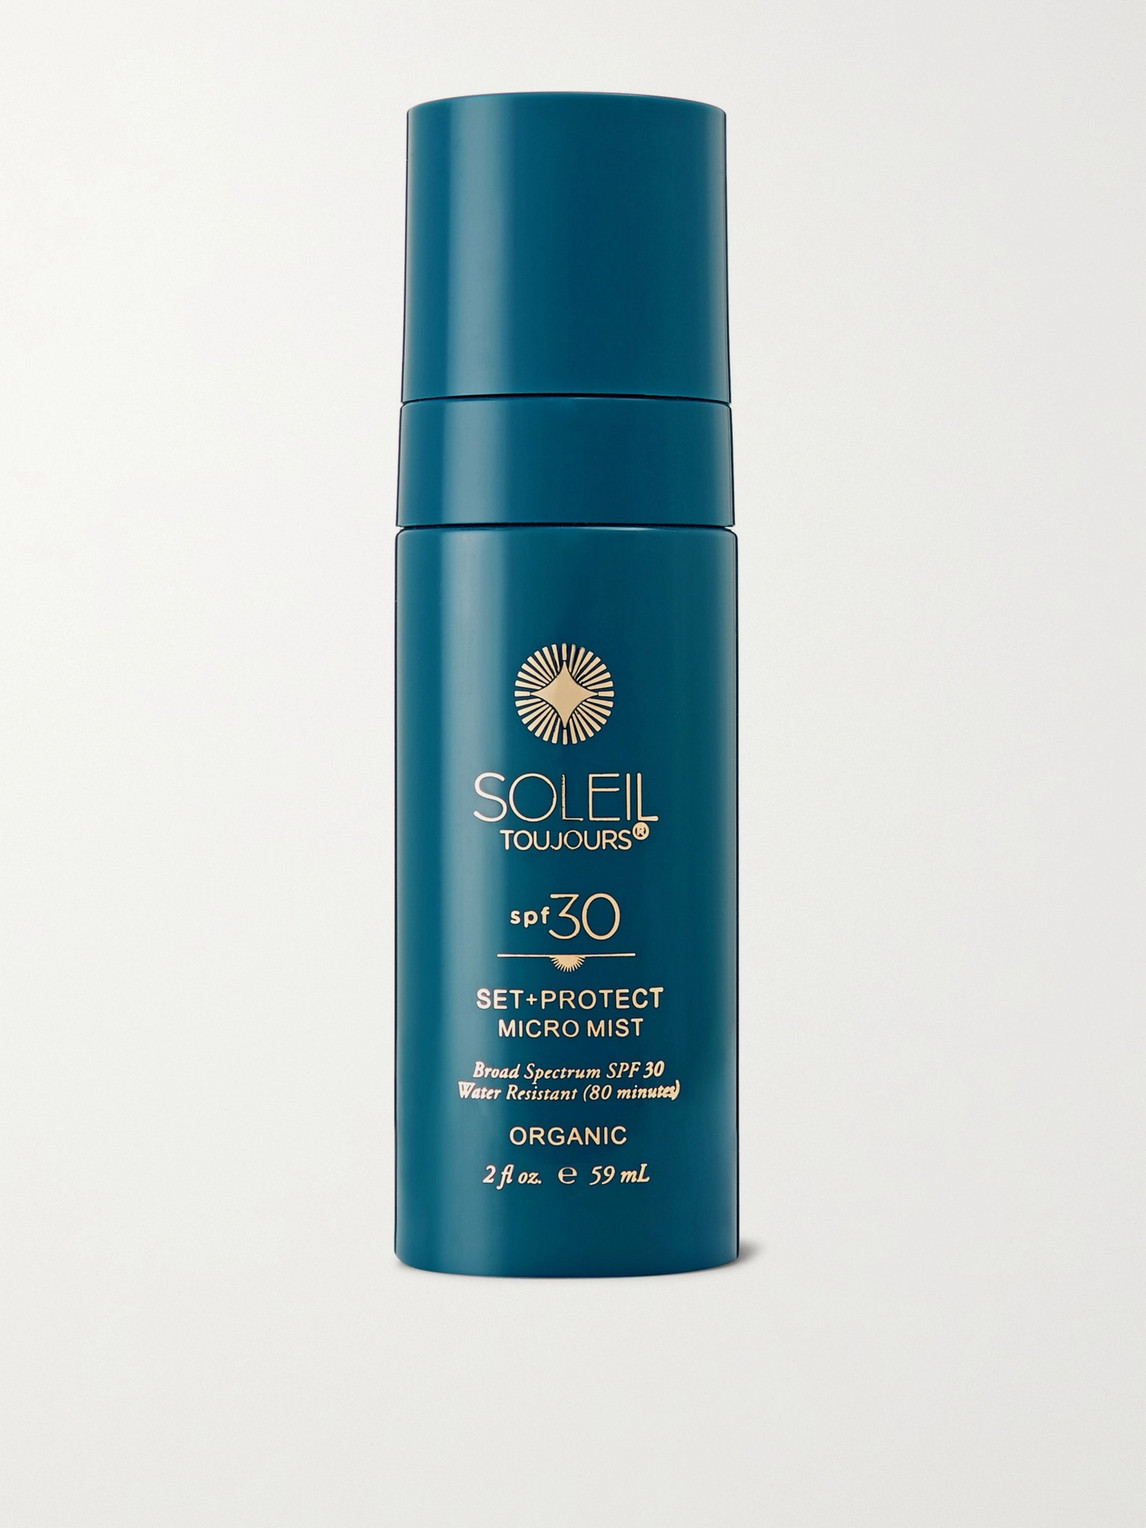 Soleil Toujours Organic Set Protect Micro Mist Spf30, 59ml In Colorless